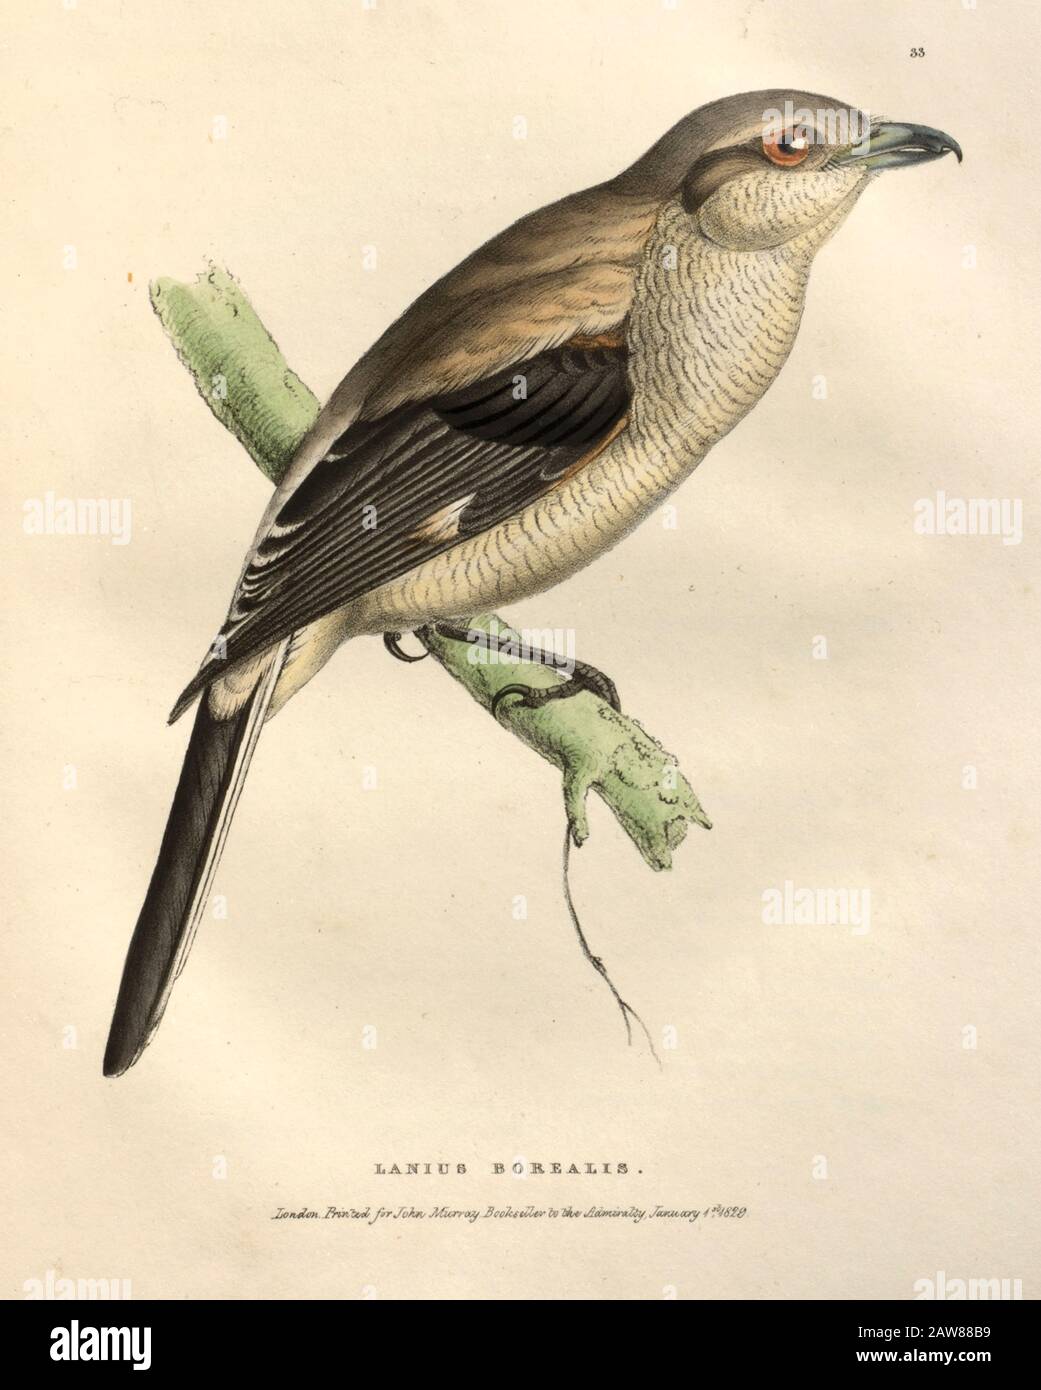 Northern shrike (Lanius borealis) songbird color plate of North American birds from Fauna boreali-americana; or, The zoology of the northern parts of British America, containing descriptions of the objects of natural history collected on the late northern land expeditions under command of Capt. Sir John Franklin by Richardson, John, Sir, 1787-1865 Published 1829 Stock Photo